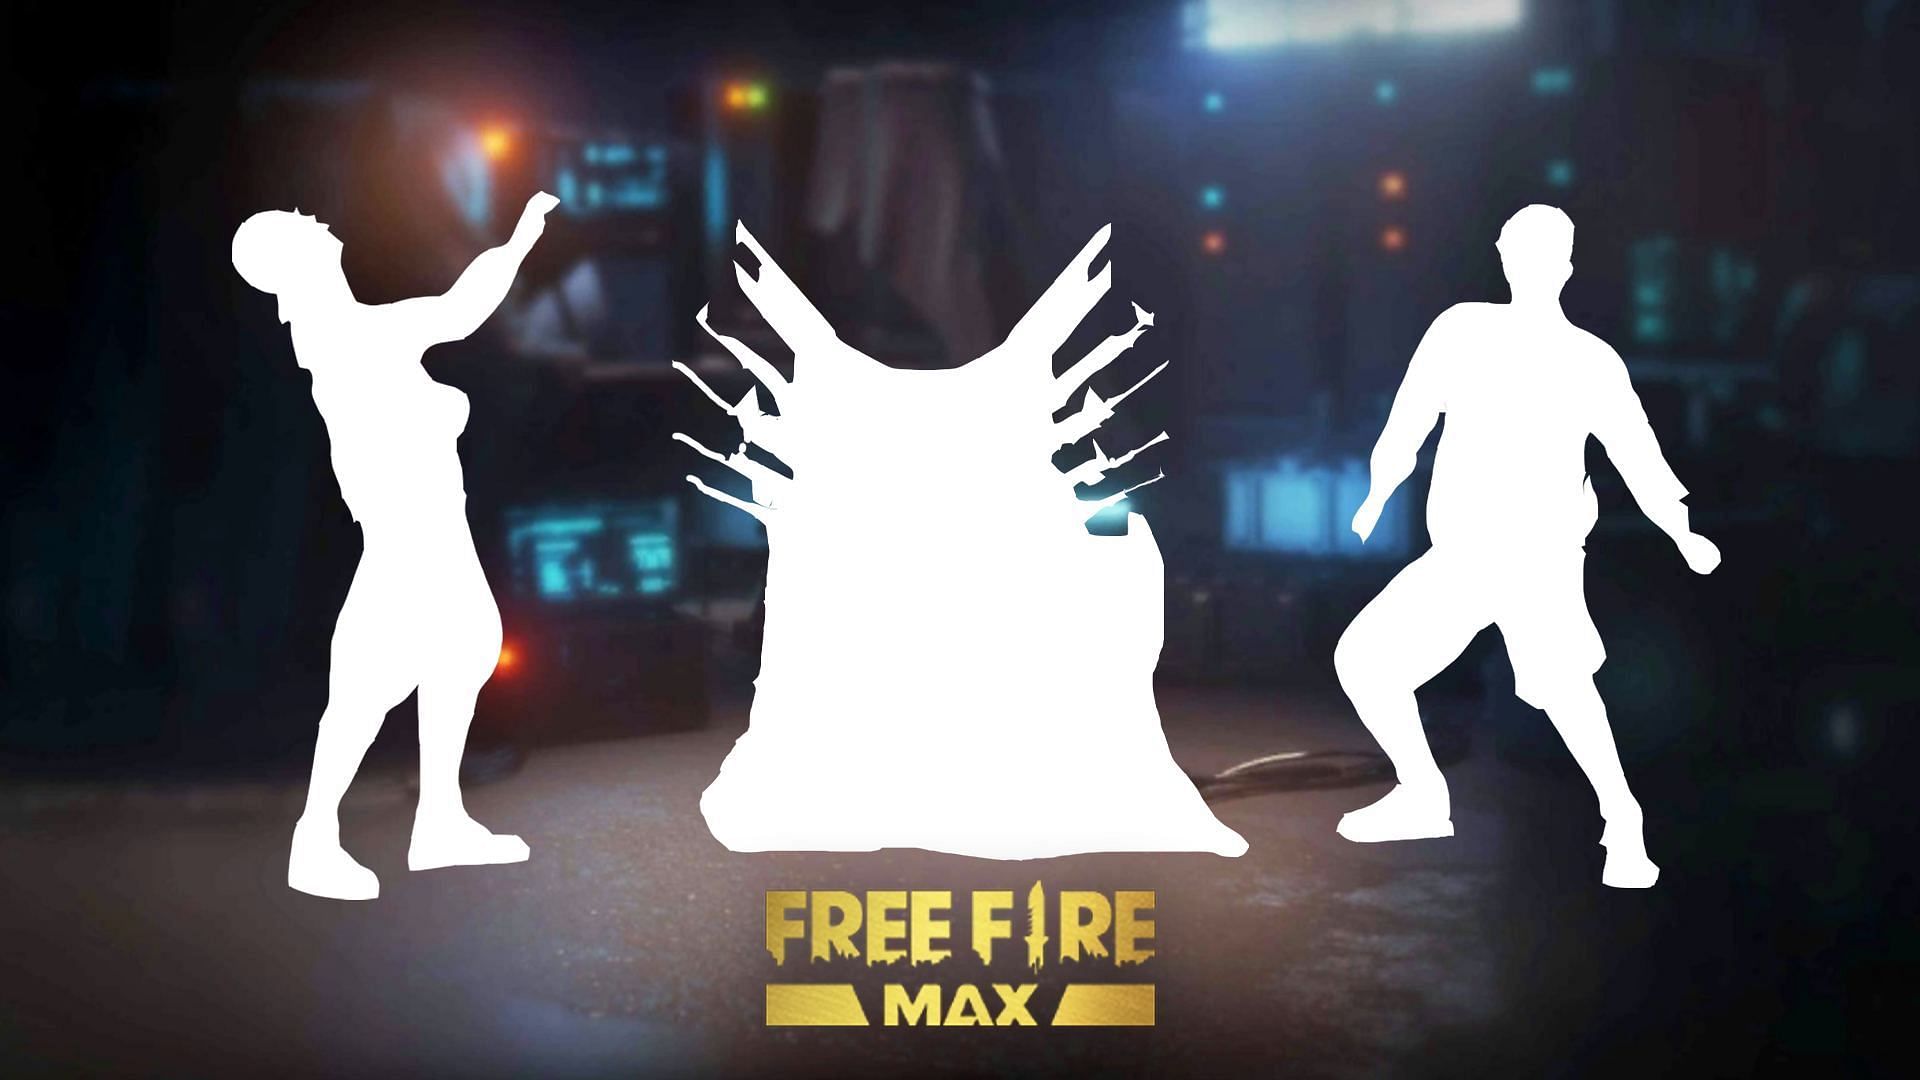 There are an uncountable number of emotes in FF MAX (Image via Sportskeeda)